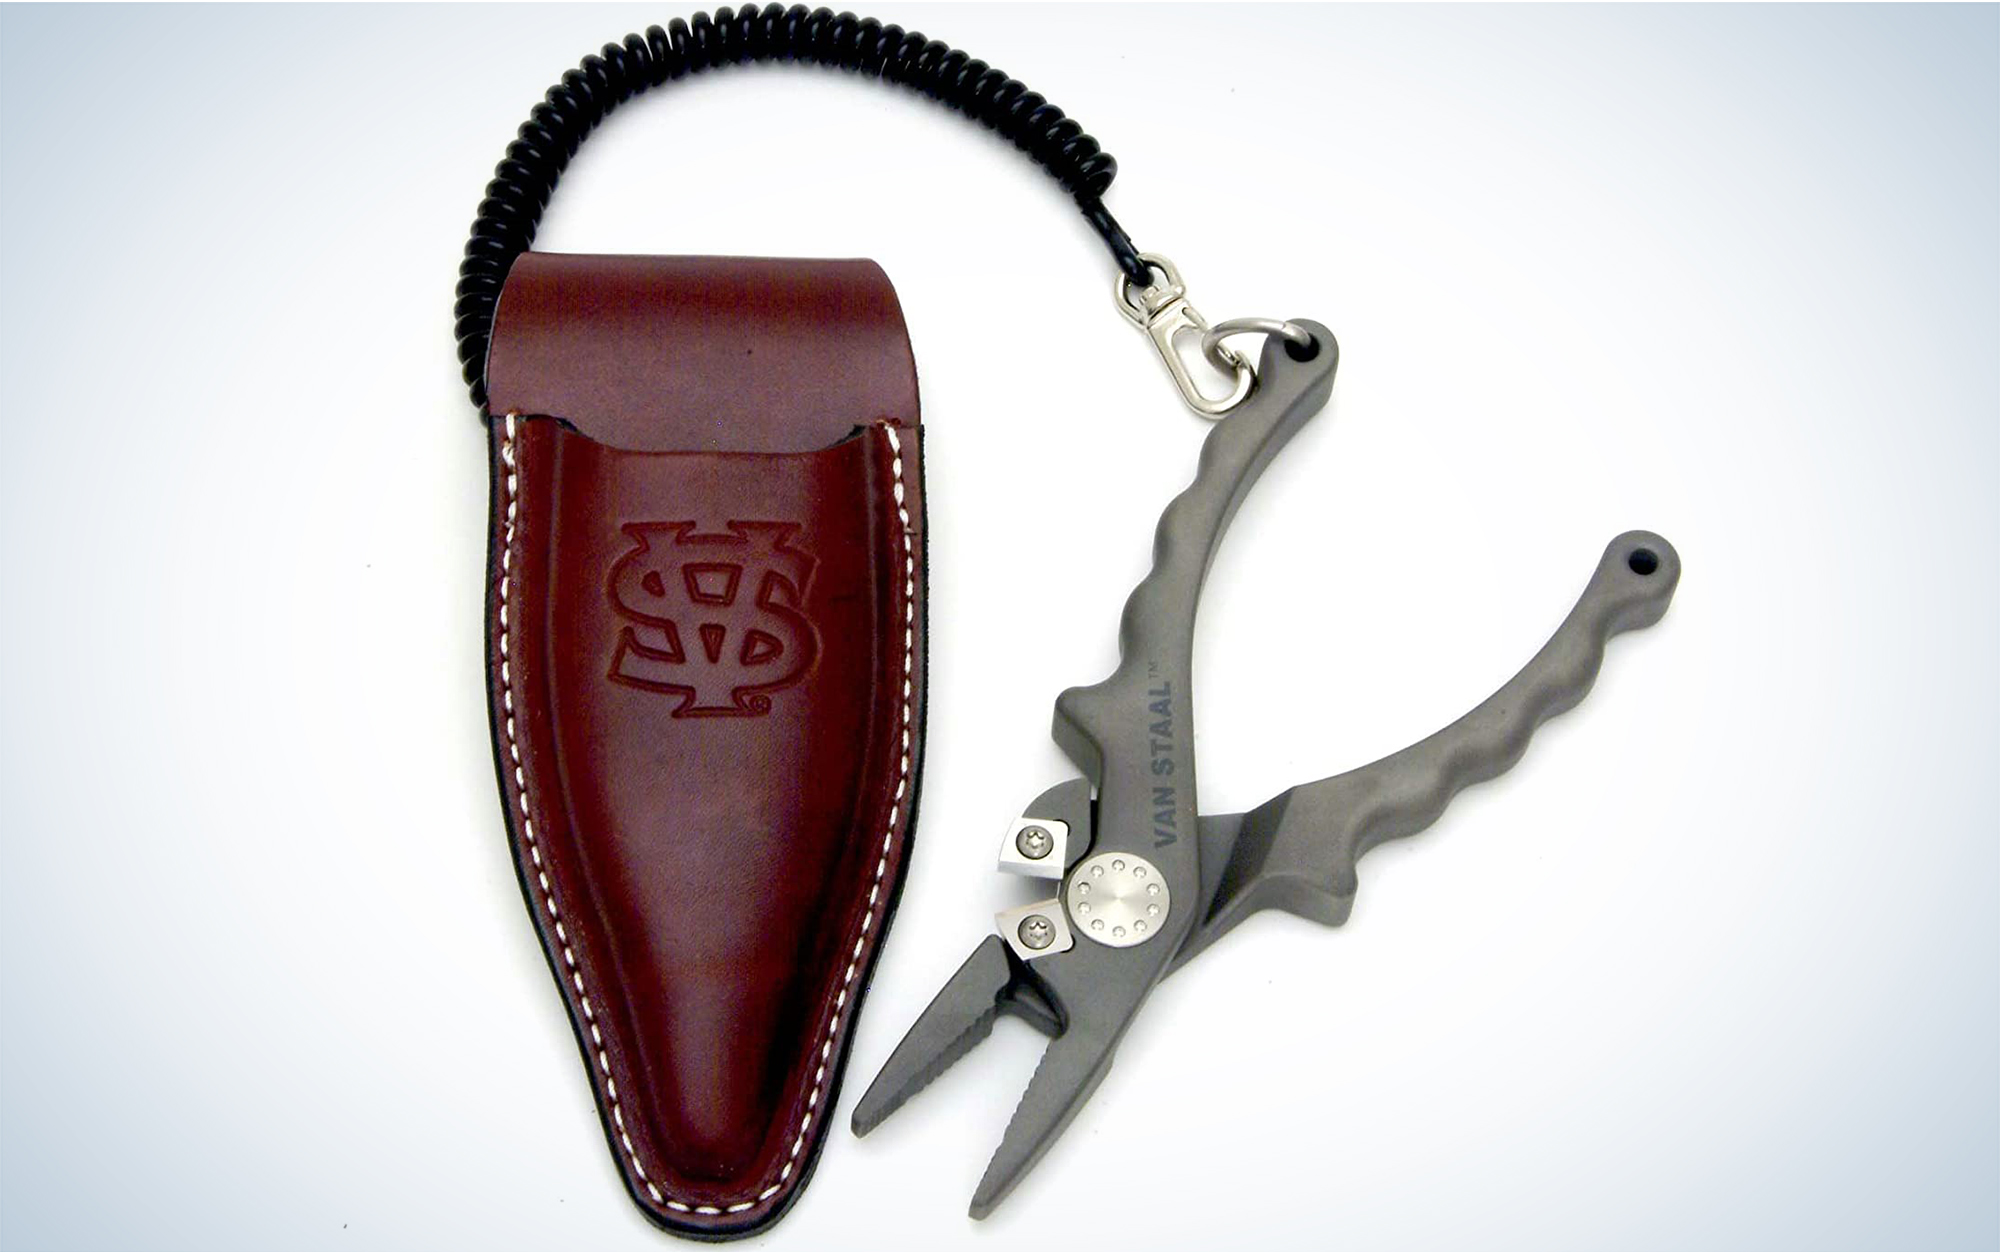 Fishing Pliers Sheath Practical Pocket Sheath for Pliers for Outdoor Fishing